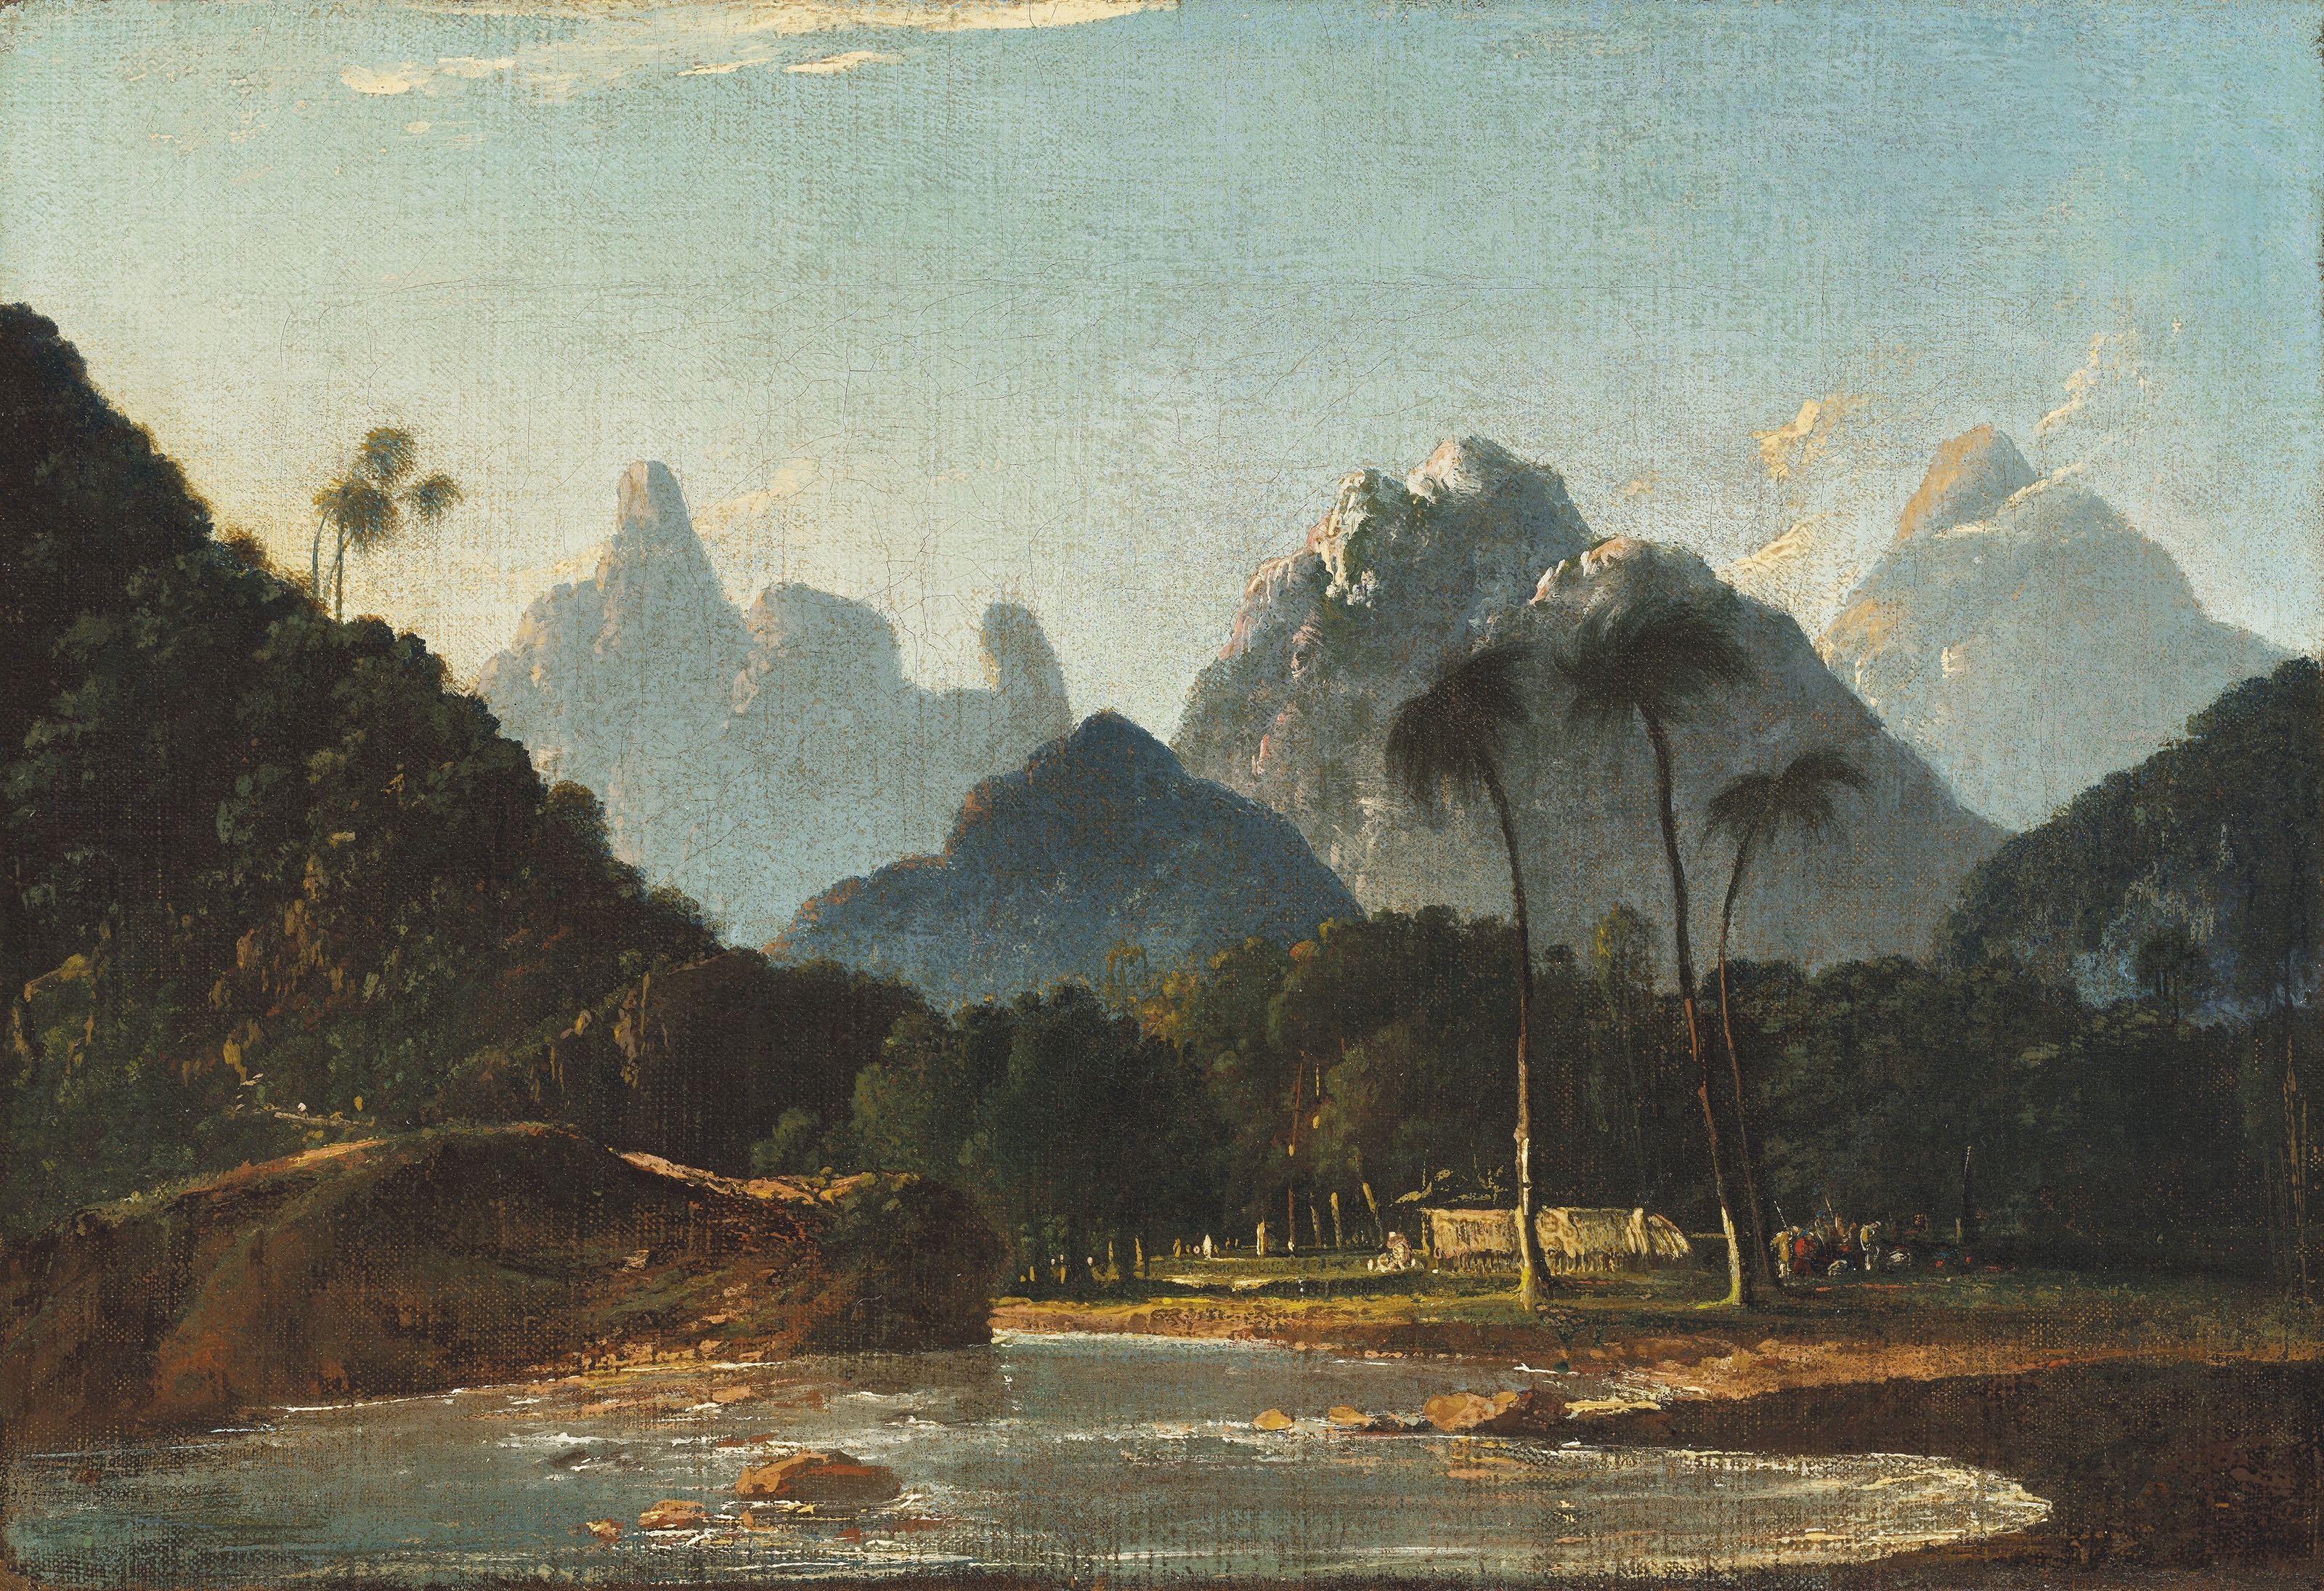 Artwork by William Hodges, A View of Vaitepiha Bay, Tahiti (Tautira Valley from Tautira Bay), Made of oil on canvas